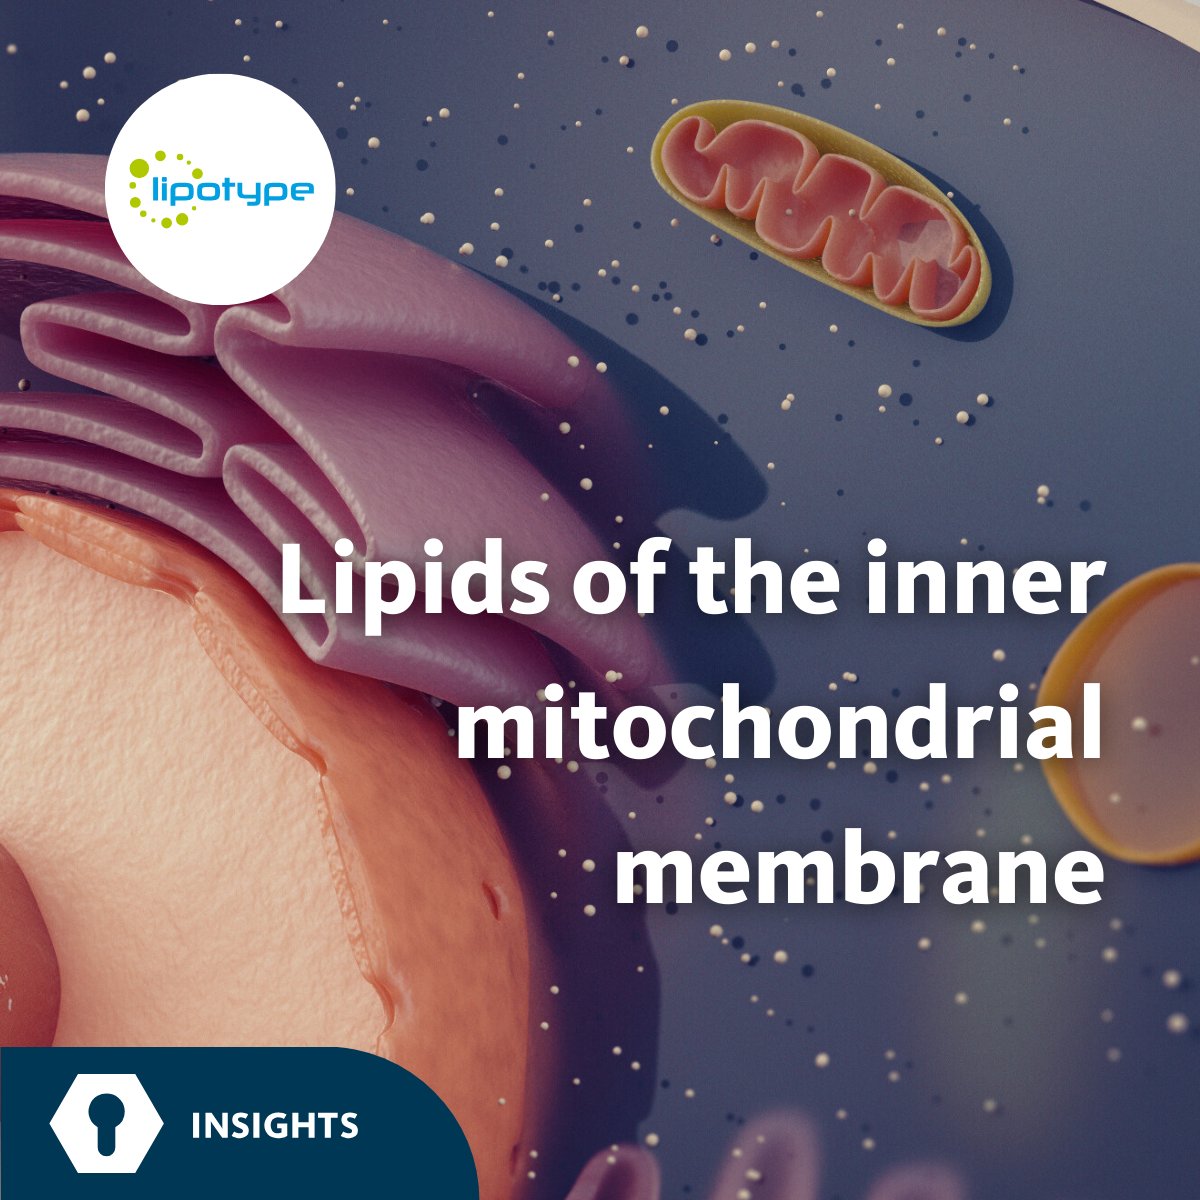 #Cardiolipin acts as a buffer against curvature loss in the inner #mitochondrial membrane.

More:
lipotype.com/lipidomics-res…

#MitochondrialResearch #research #lipid #lipidomics #LipidMetabolism #lipotype #lipidome #mitochondria #phospholipid #cardiolipin #cristae #ATP